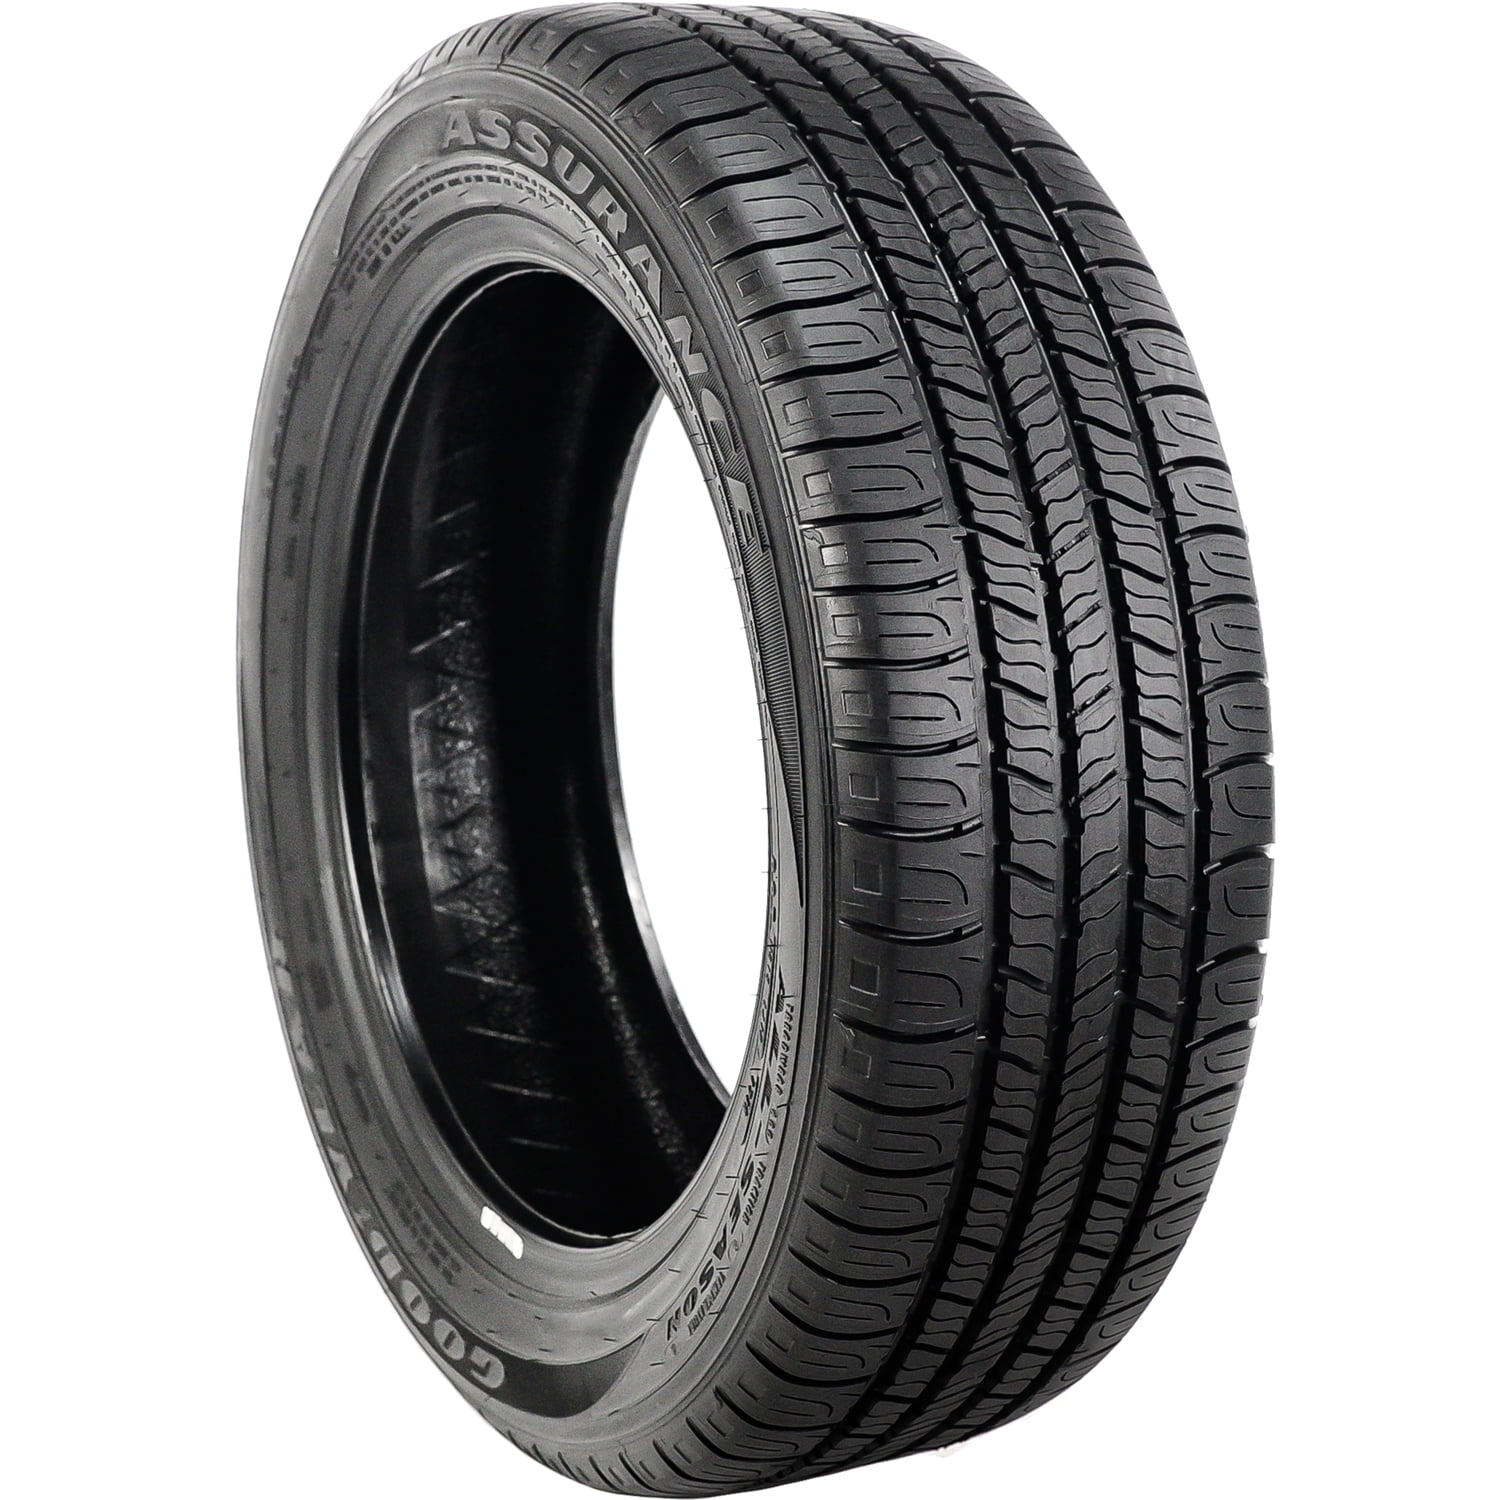 Goodyear assurance finesse P215/65R17 99H bsw all-season tire 